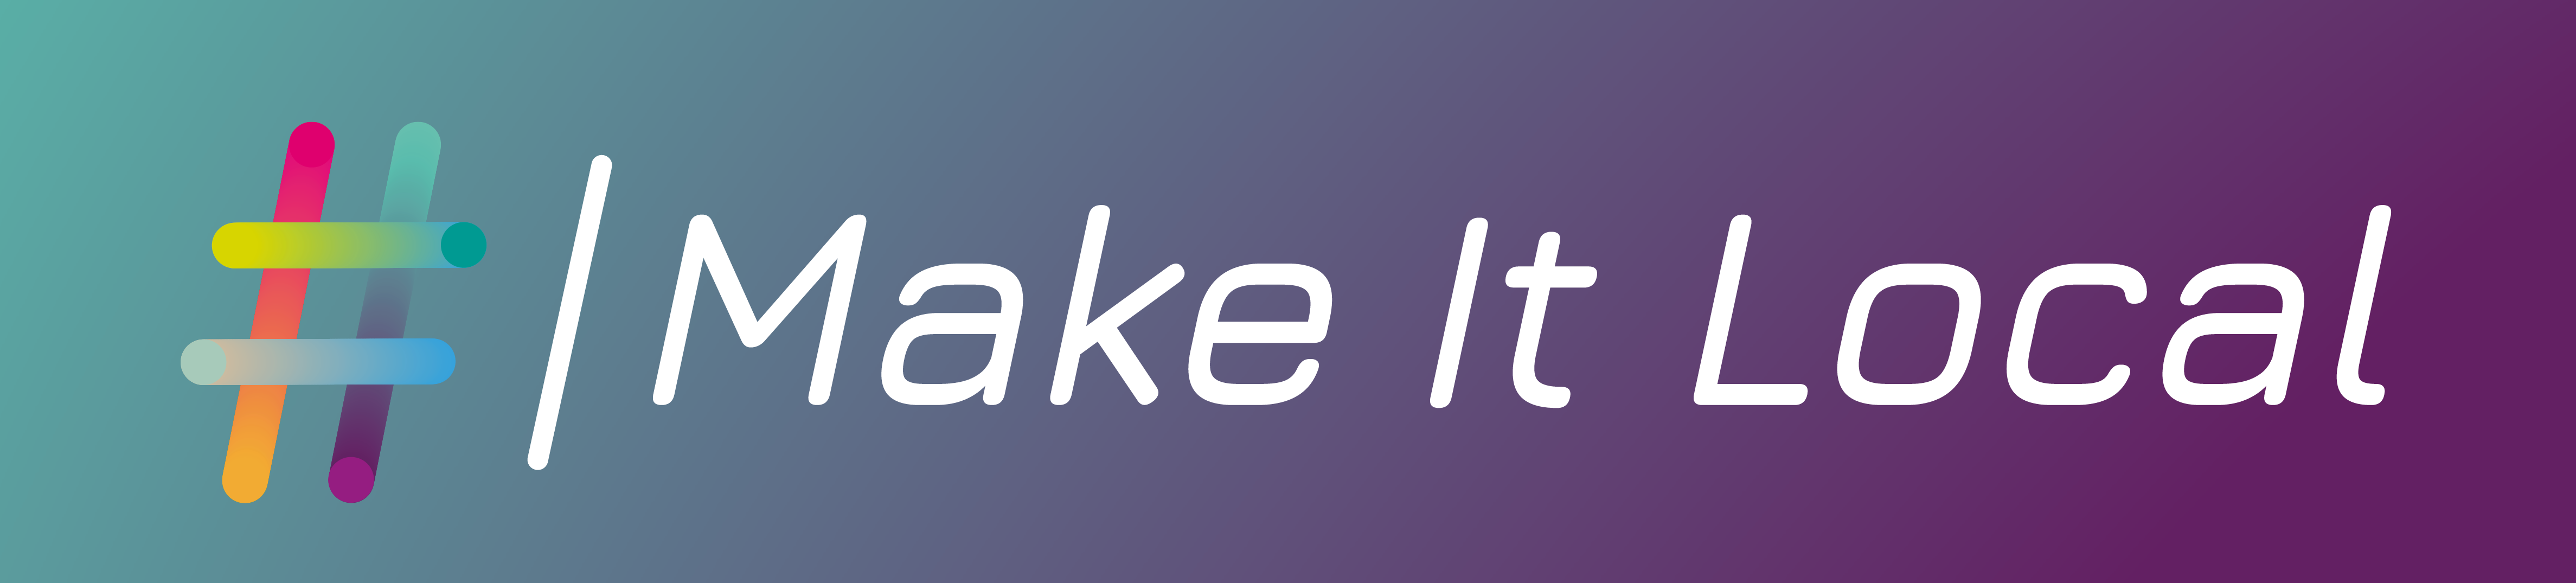 Multi-coloured hashtag text to the right of it that says Make It Local